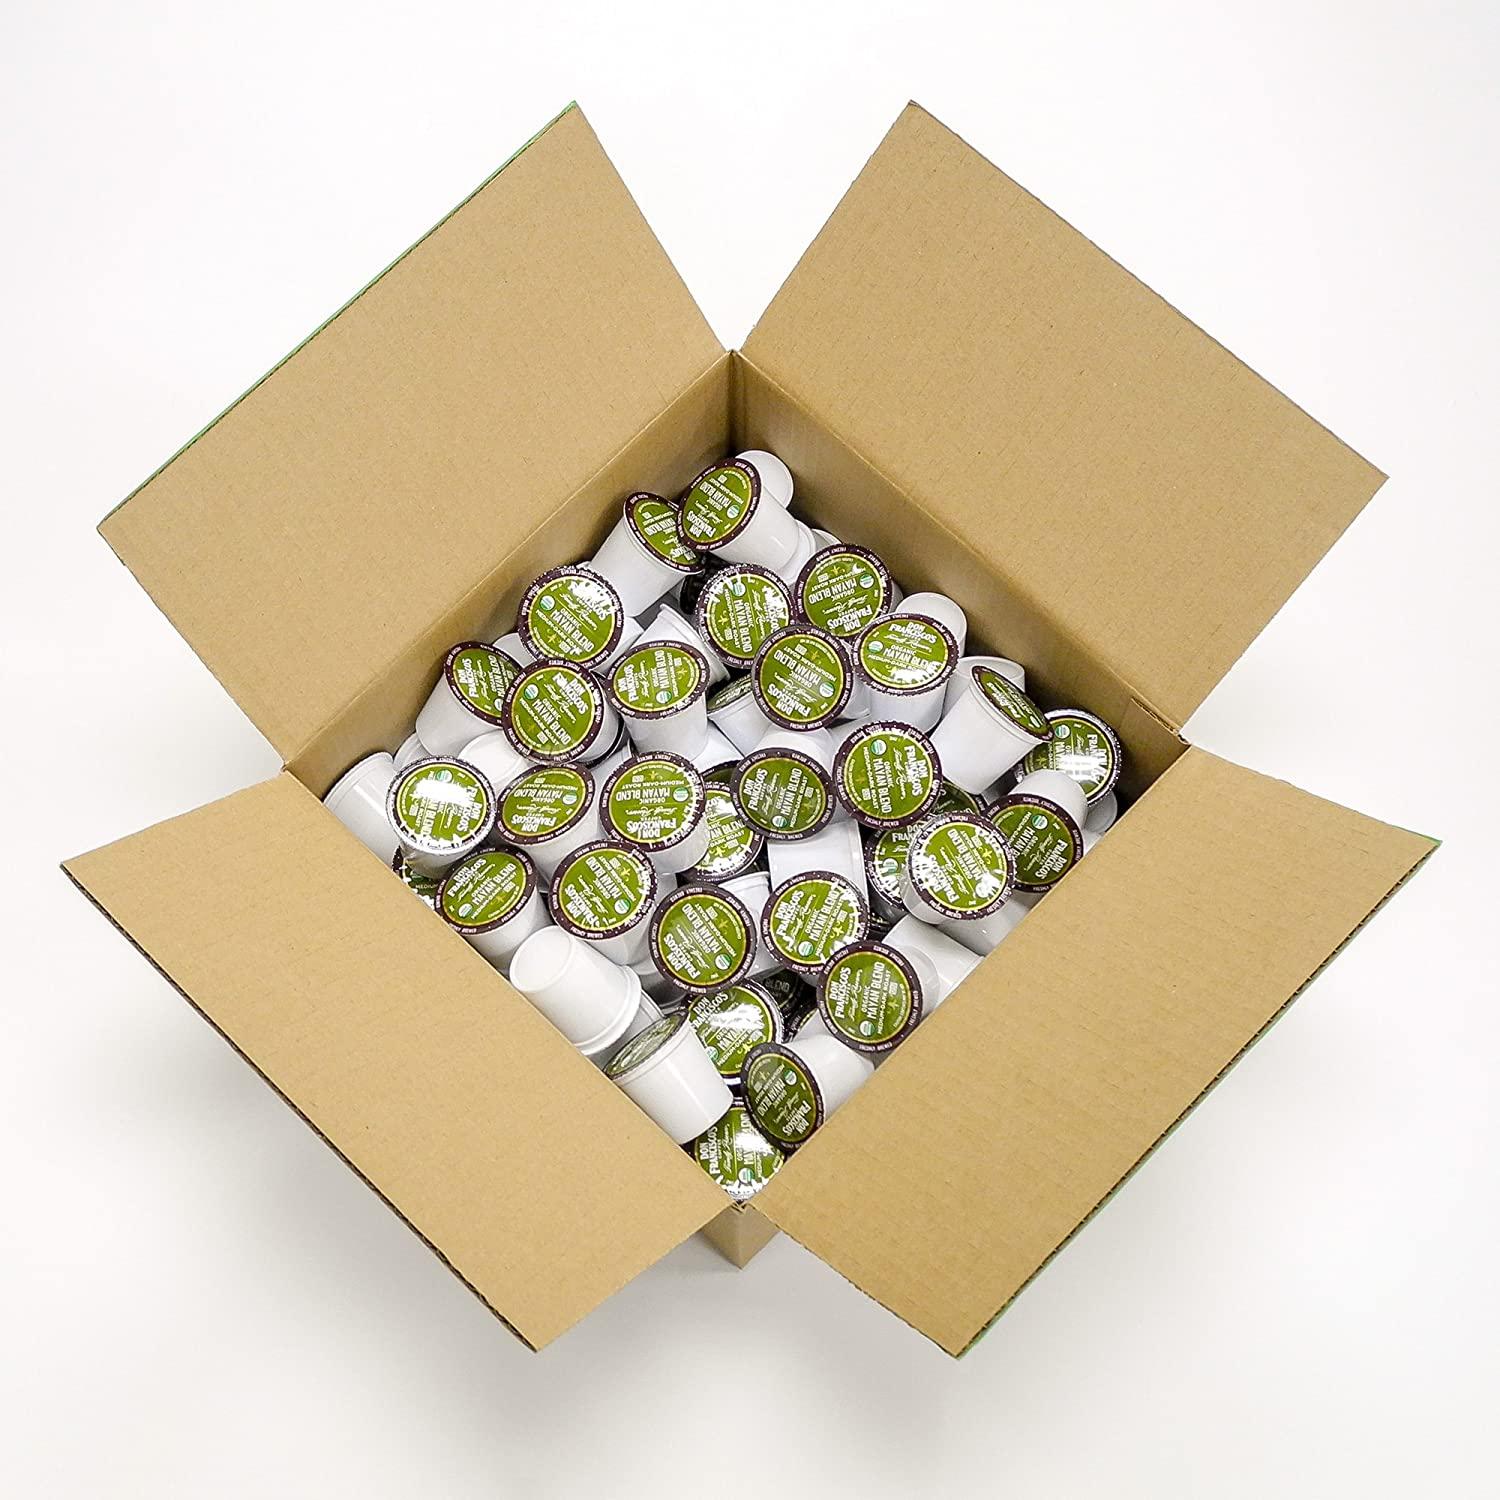 100 Don Franciscos Organic Mayan Blend Coffee K-Cup Pods for $24.85 Shipped